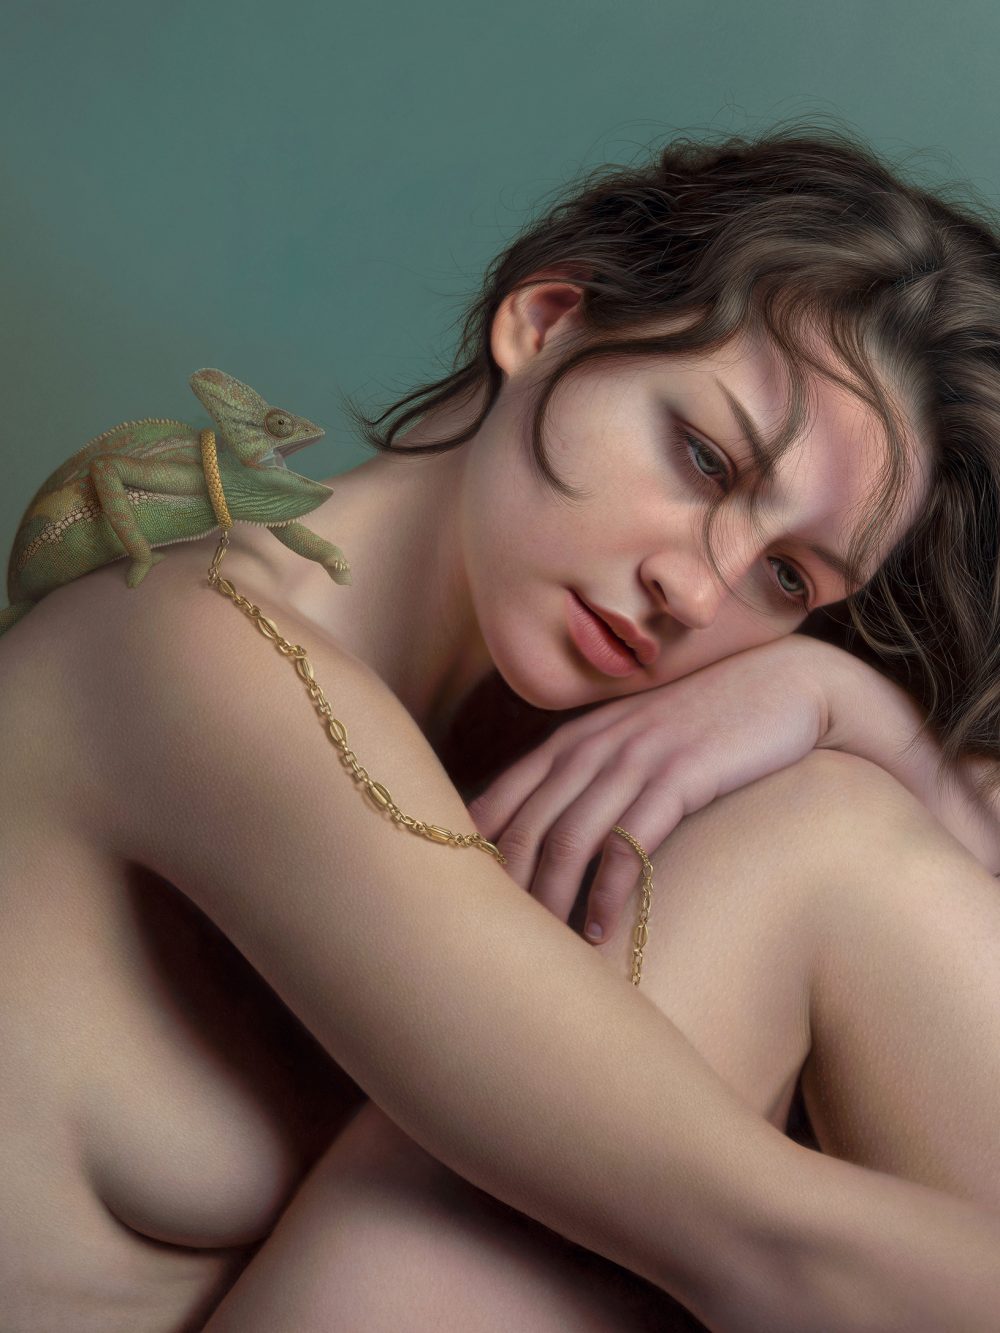 Captivity by Marco Grassi